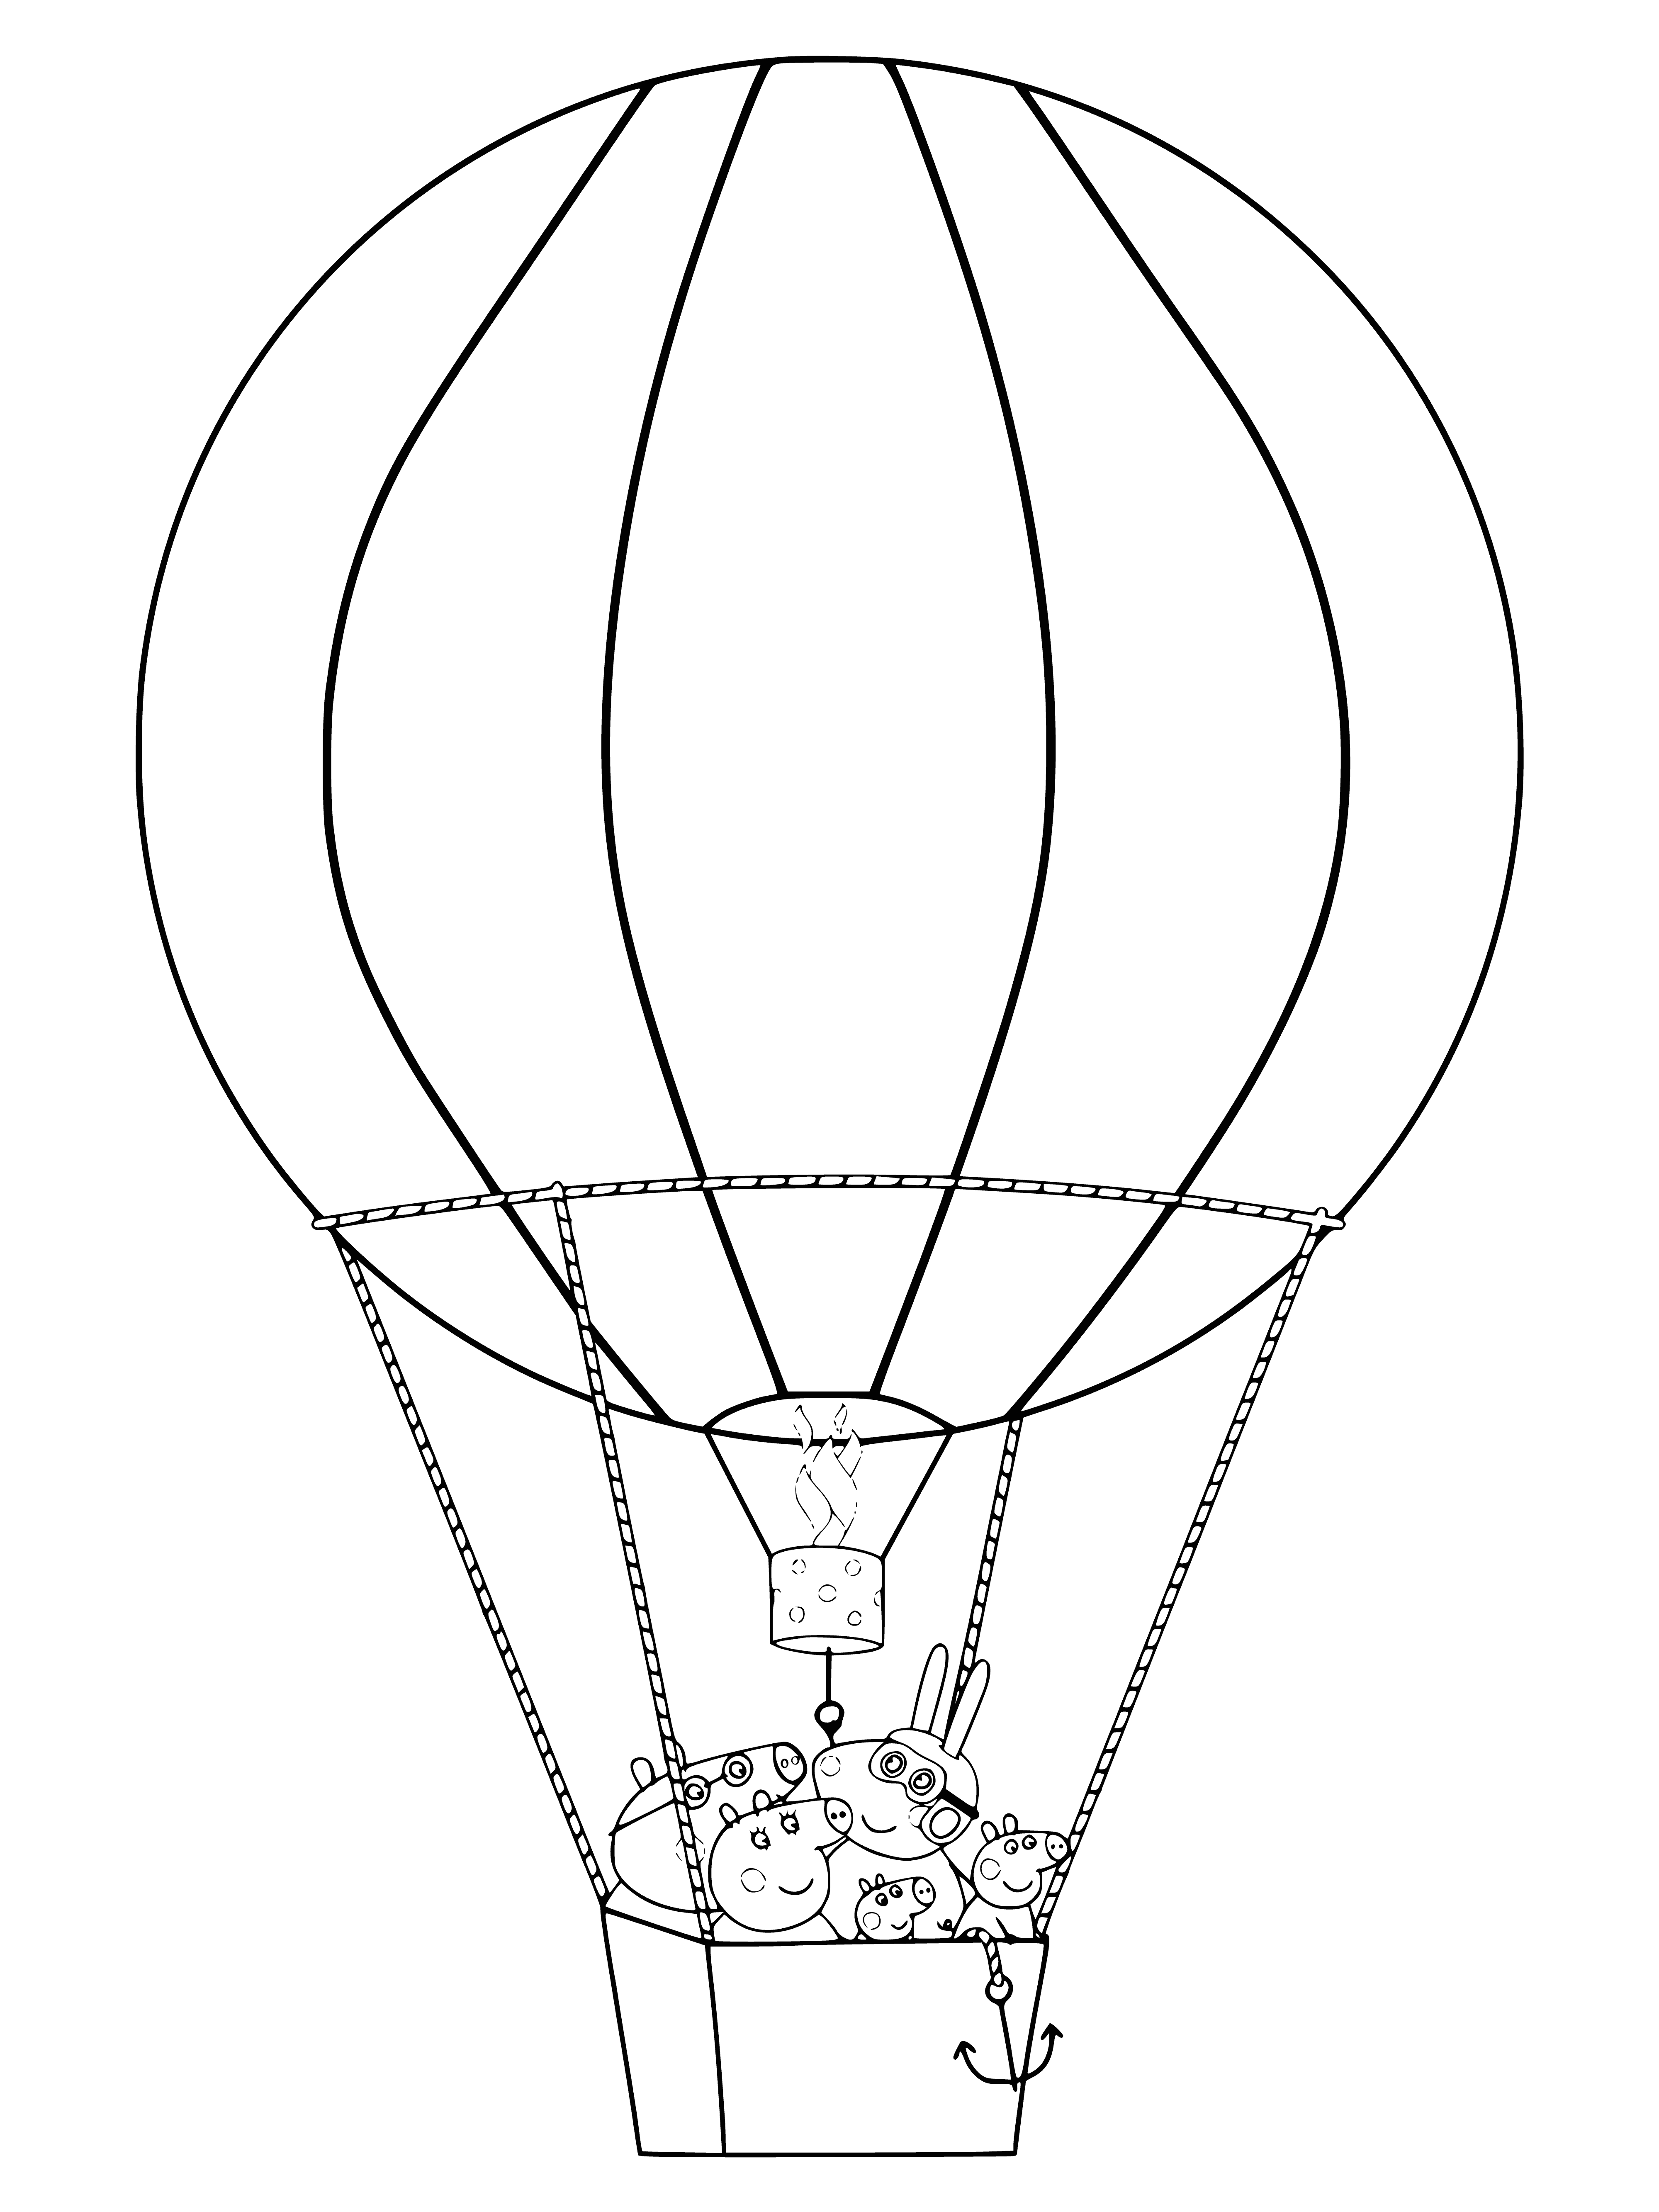 coloring page: Peppa Pig in hot air balloon - colors red, blue, yellow. Wearing pink skirt + white shirt w/ big smile.